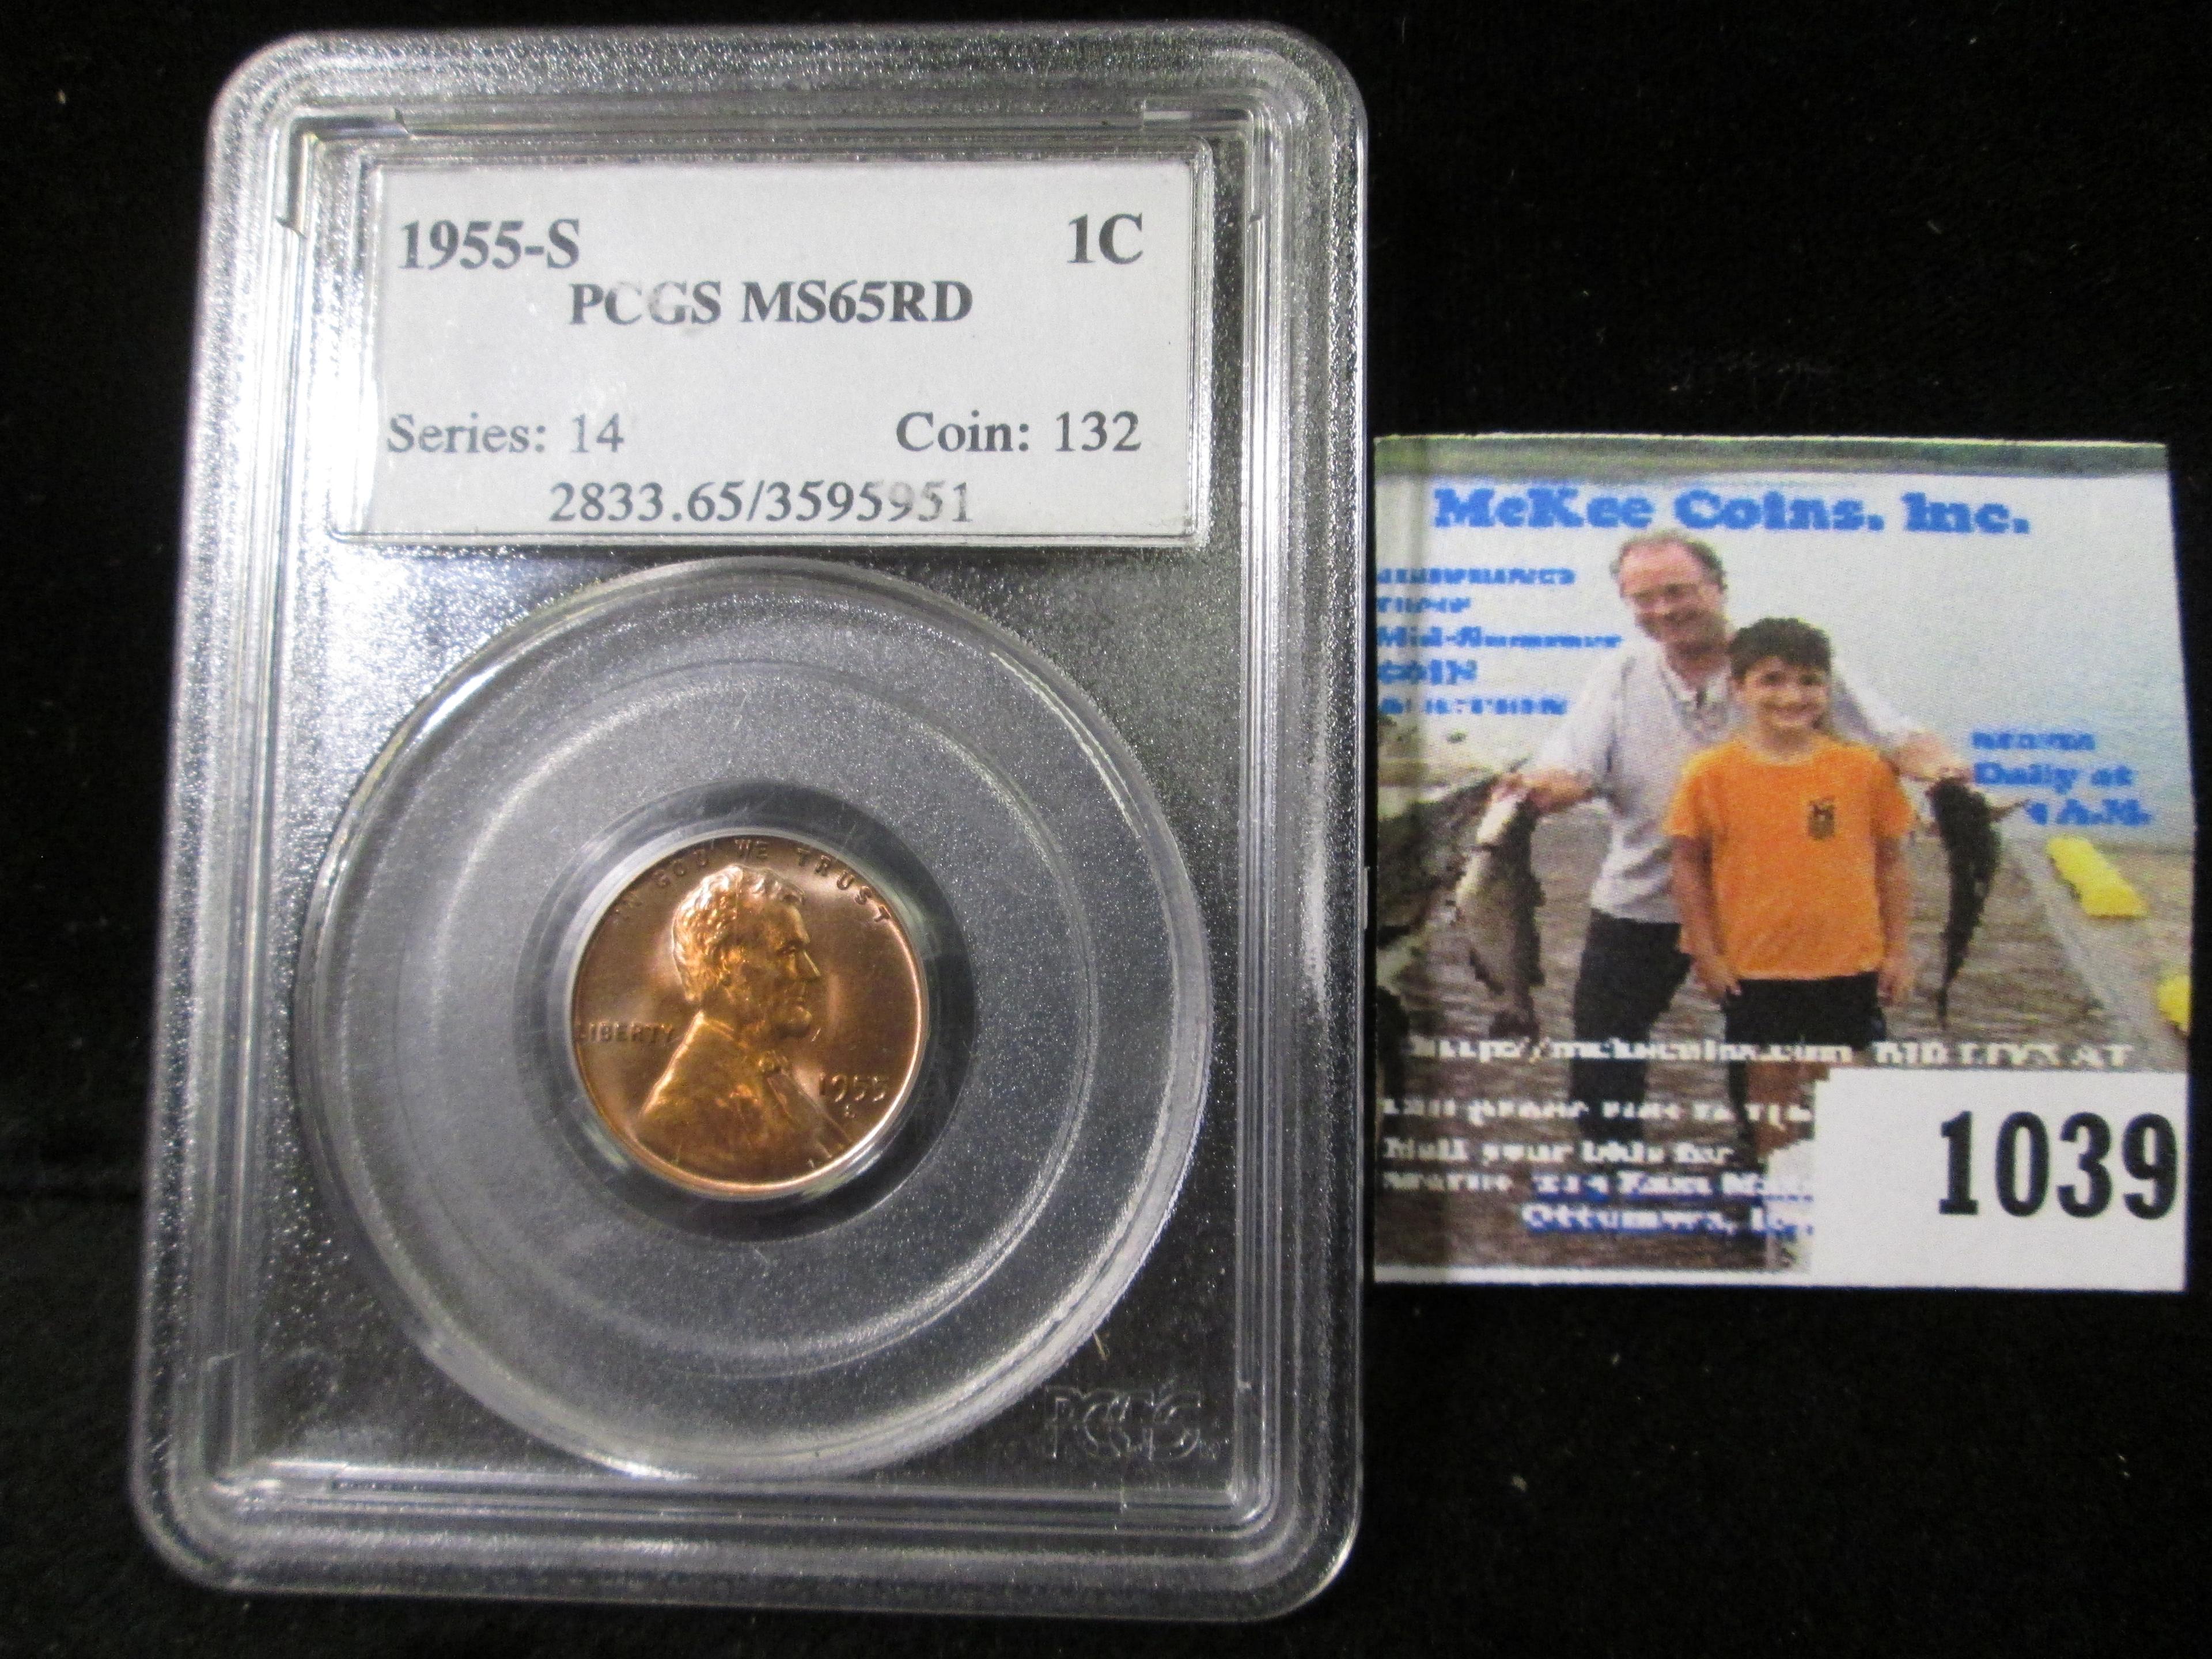 1955 S Lincoln Cent PCGS slabbed "MS65RD".